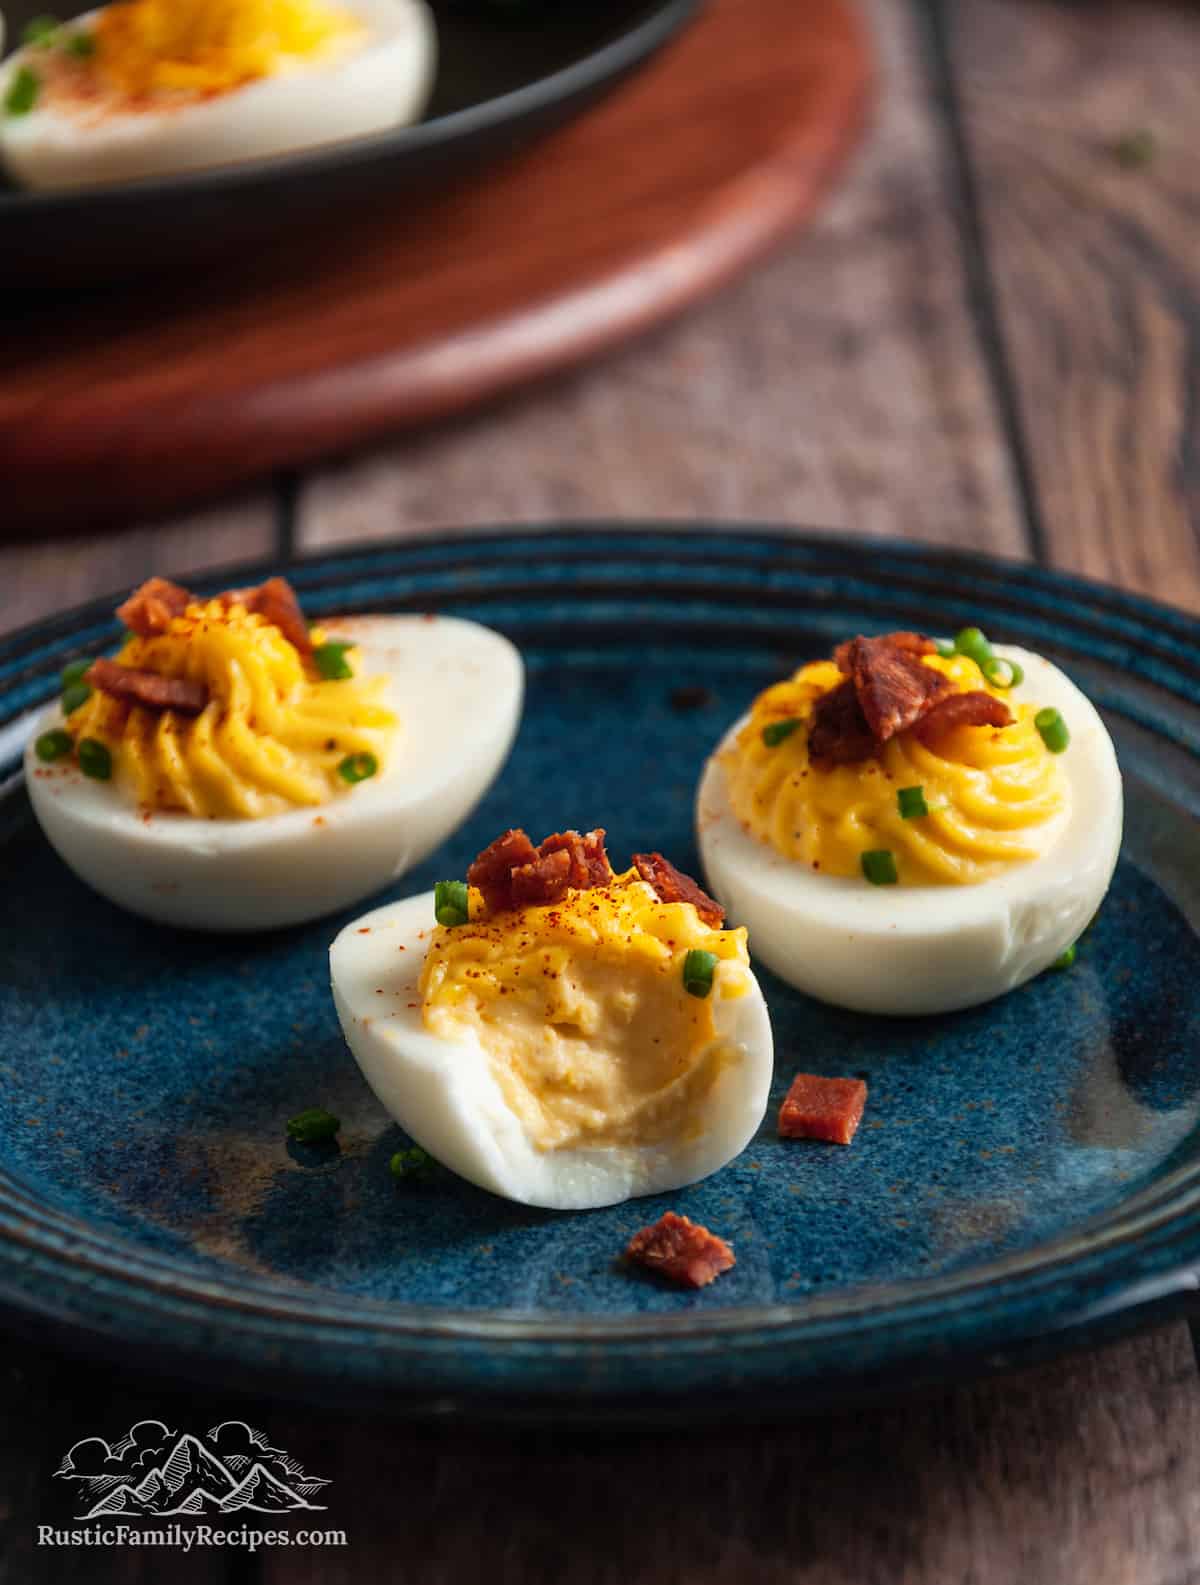 3 deviled eggs on a plate, one with a bite taken out